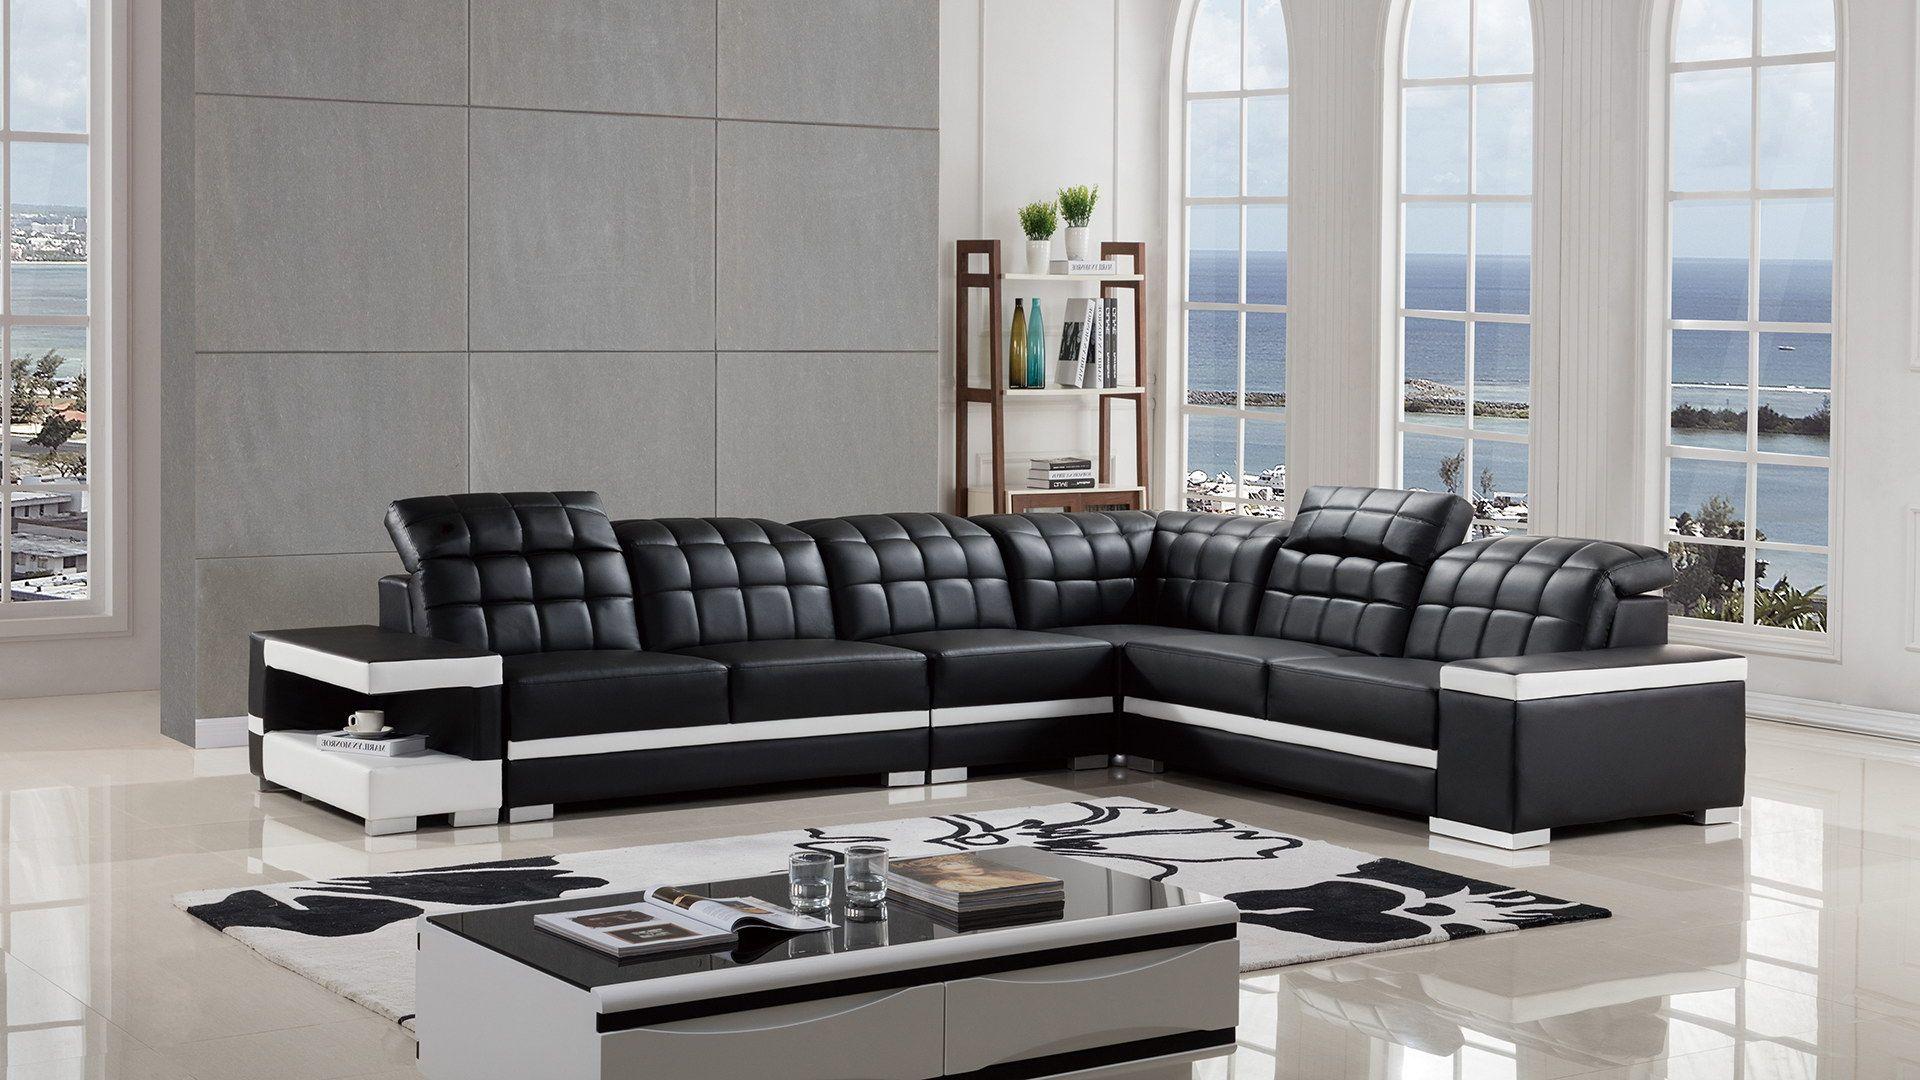 Contemporary, Modern Sectional Sofa Set AE-LD809R-BK.W AE-LD809R-BK.W in White, Black Faux Leather